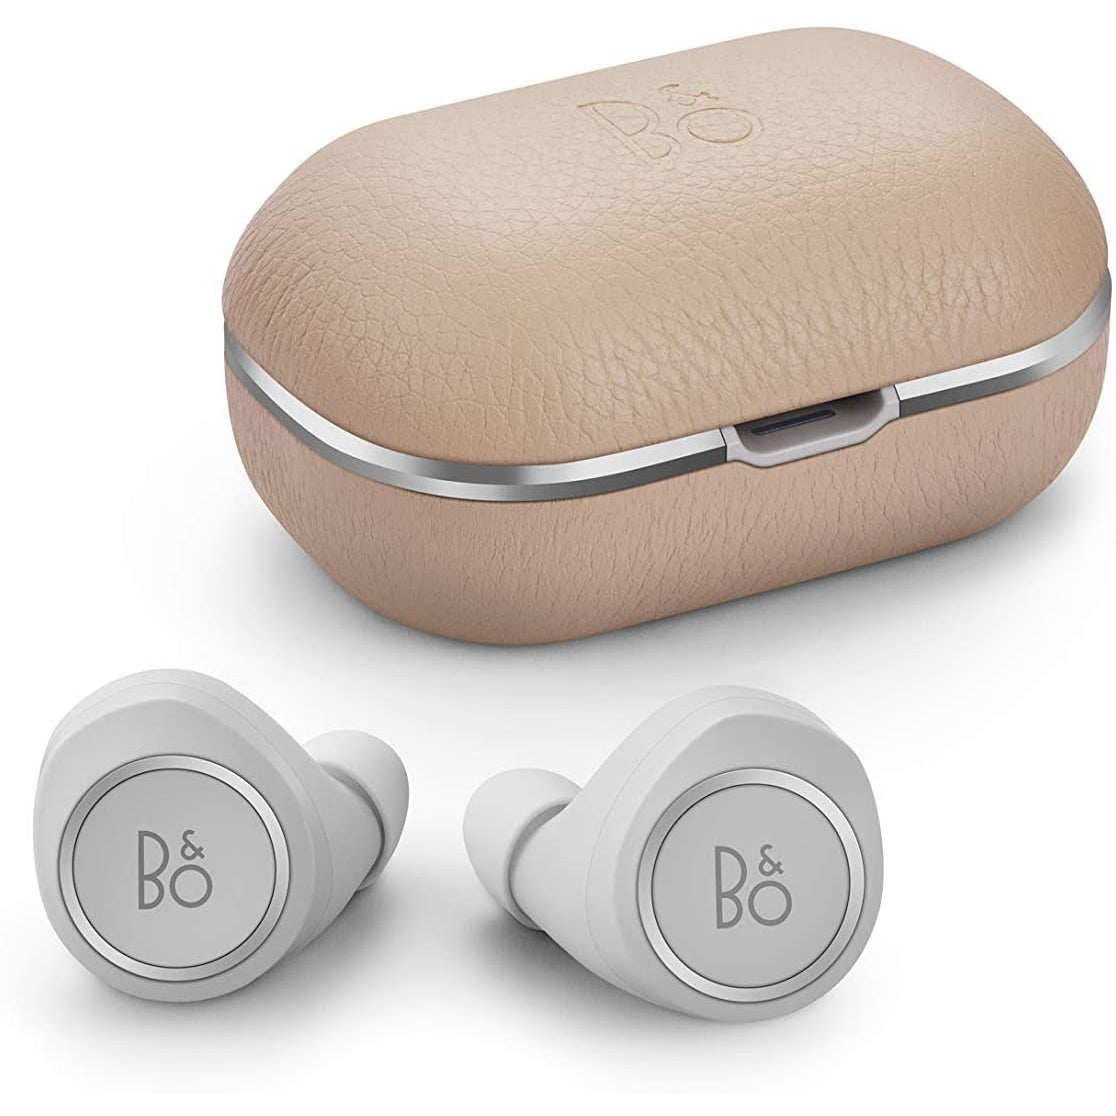 Bang & Olufsen BeoPlay E8 2.0 Wireless Earbuds